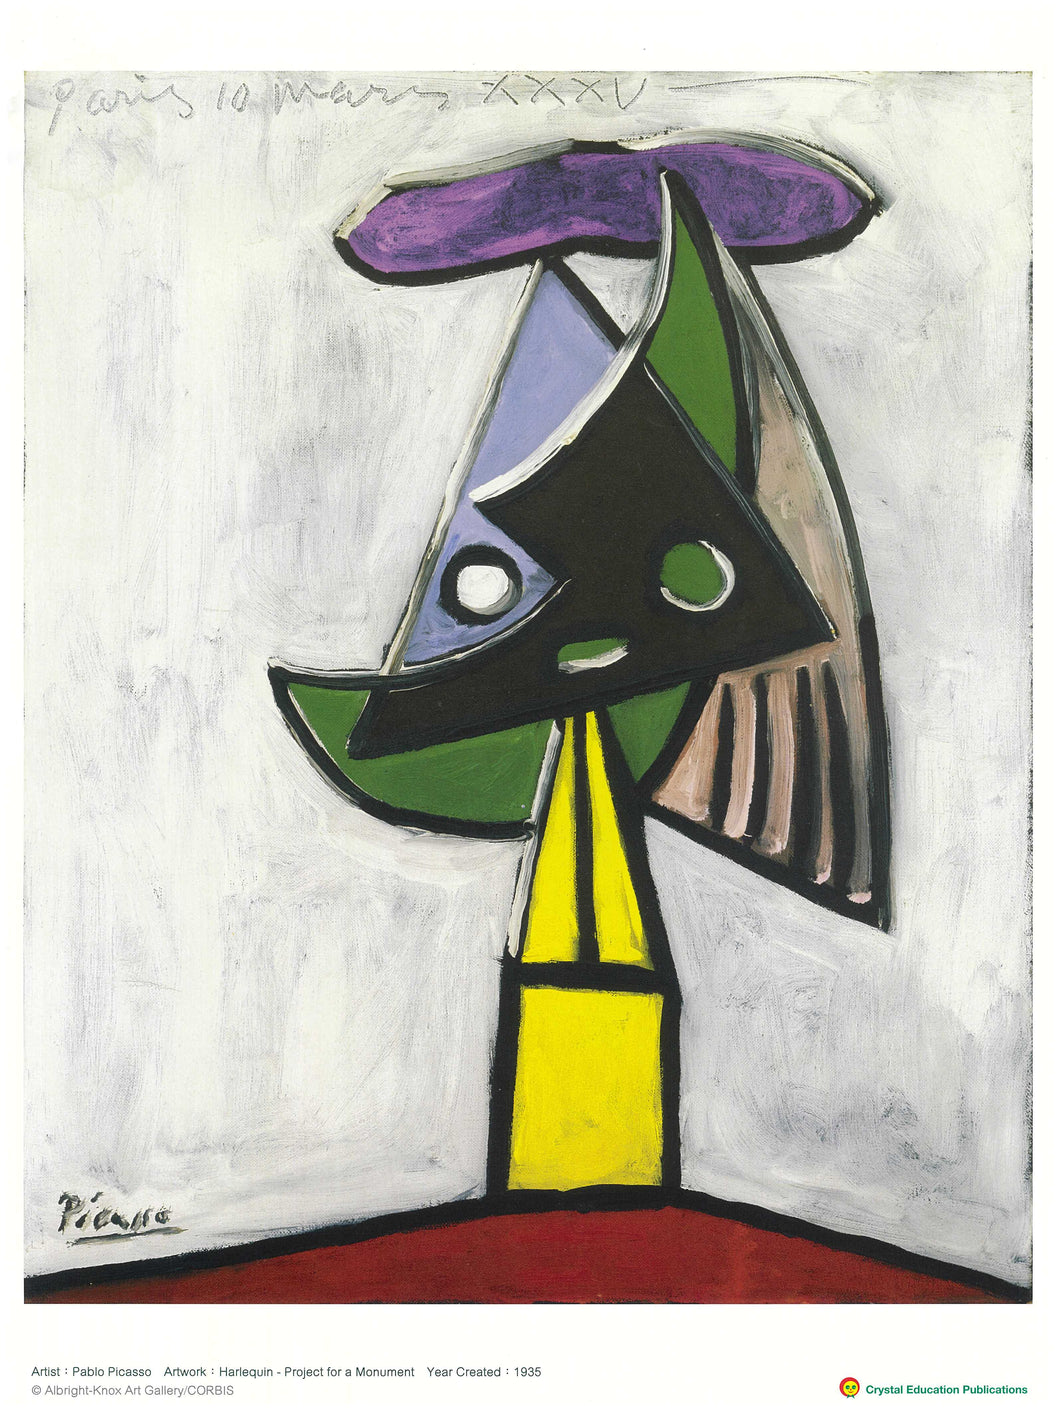 Harlequin – Project for a Monument (Pablo Picasso, 1935) - 丑角